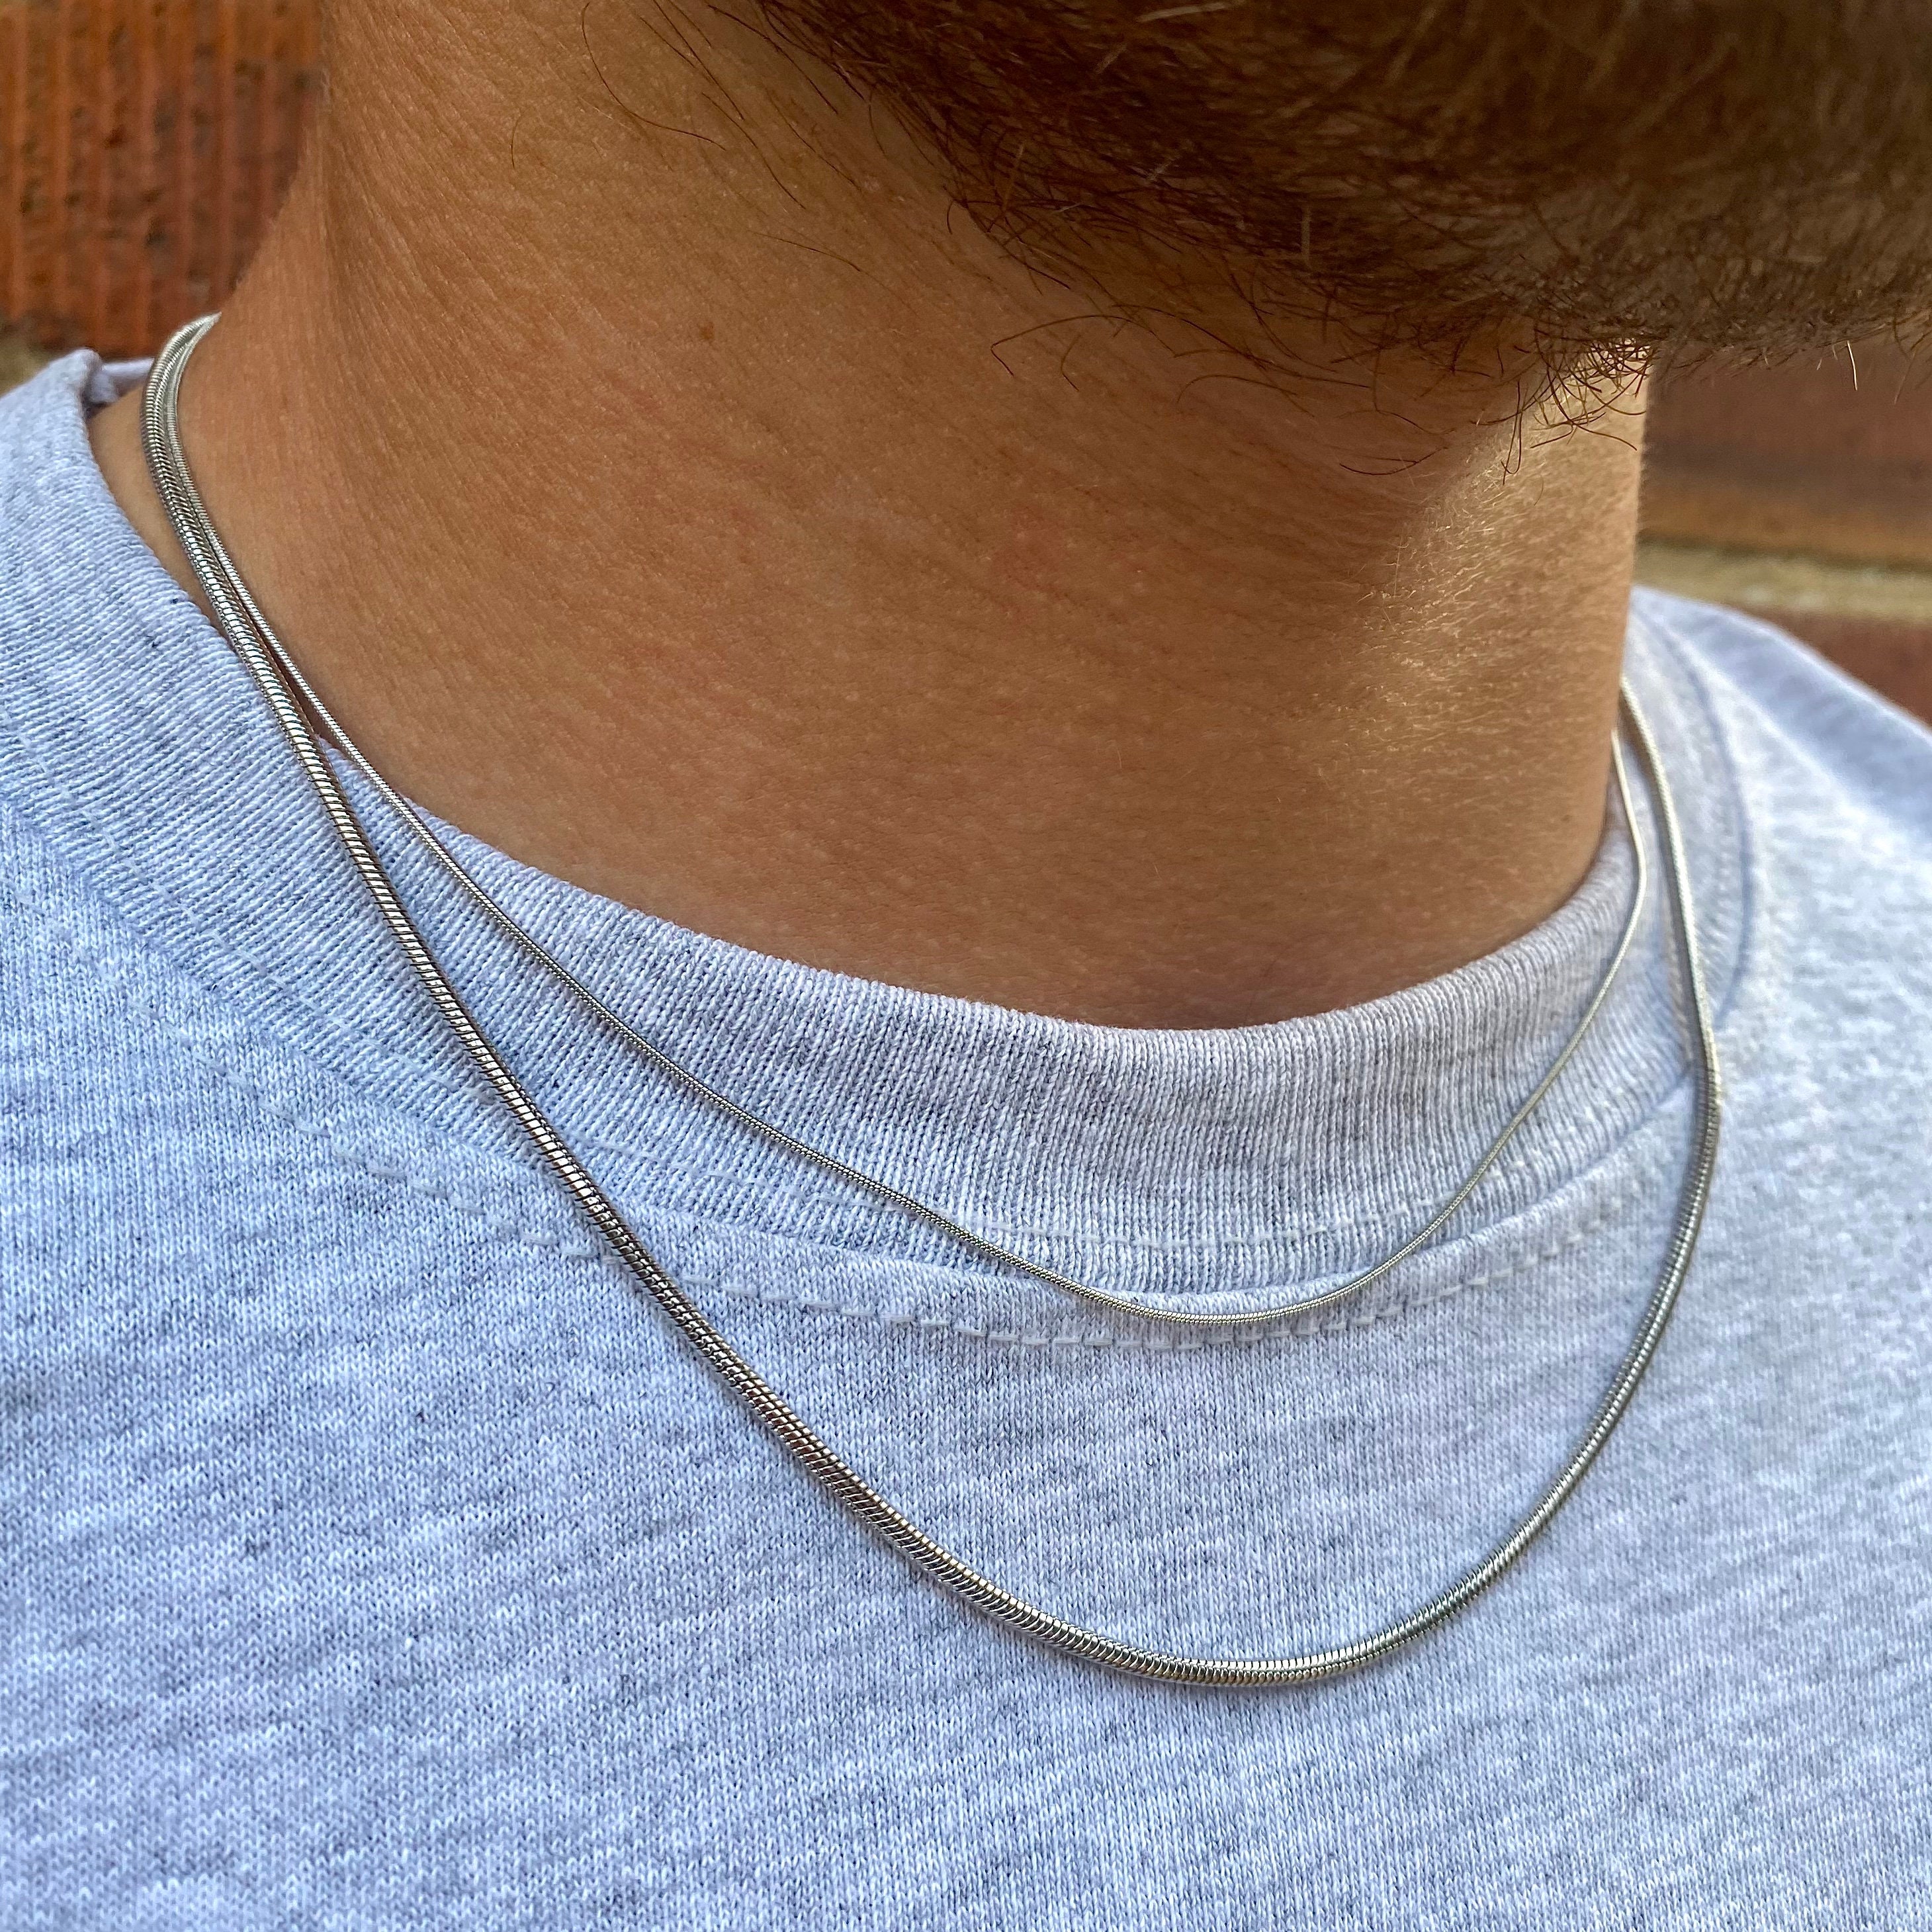 3mm Round Snake Chain Necklace 14K Solid Yellow Gold Round Snake Chain Fine Jewelry Unisex Necklace, Mens Gold Chain